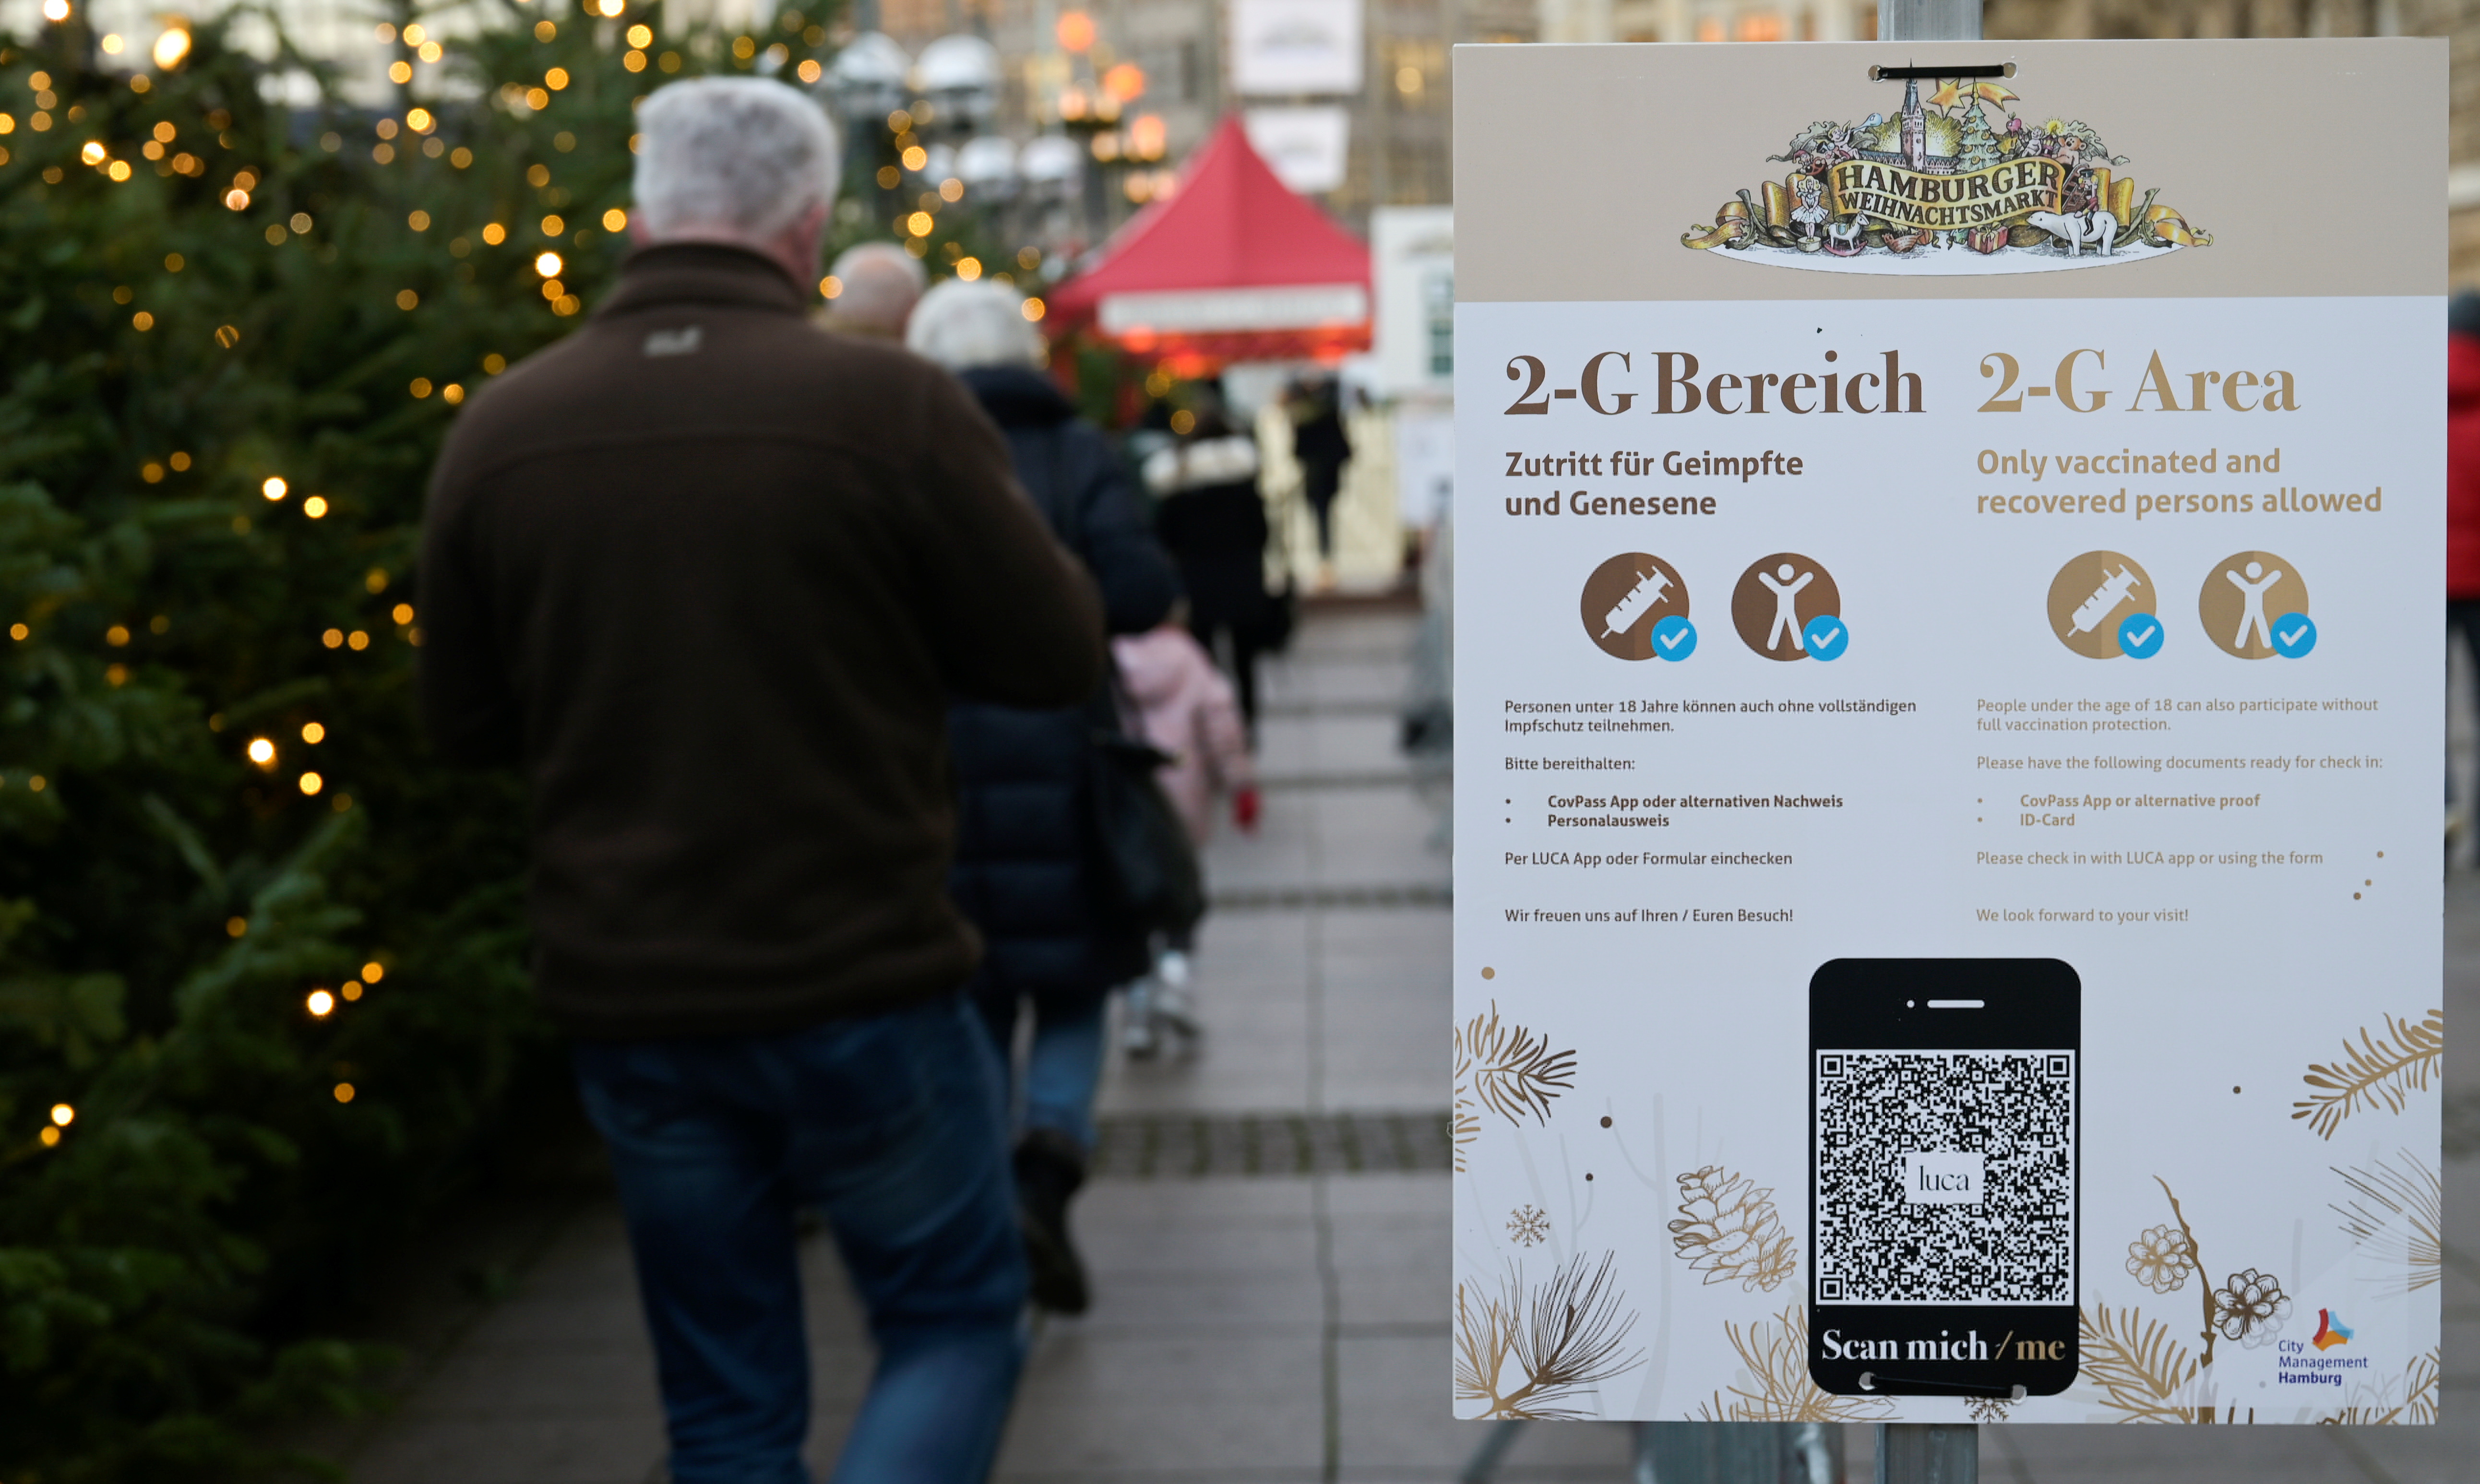 People wait in front of '2G' rule signs, allowing only those vaccinated or recovered from the coronavirus disease (COVID-19) to enter, at the entrance of the Christmas market in Hamburg, Germany November 22, 2021. REUTERS/Fabian Bimmer